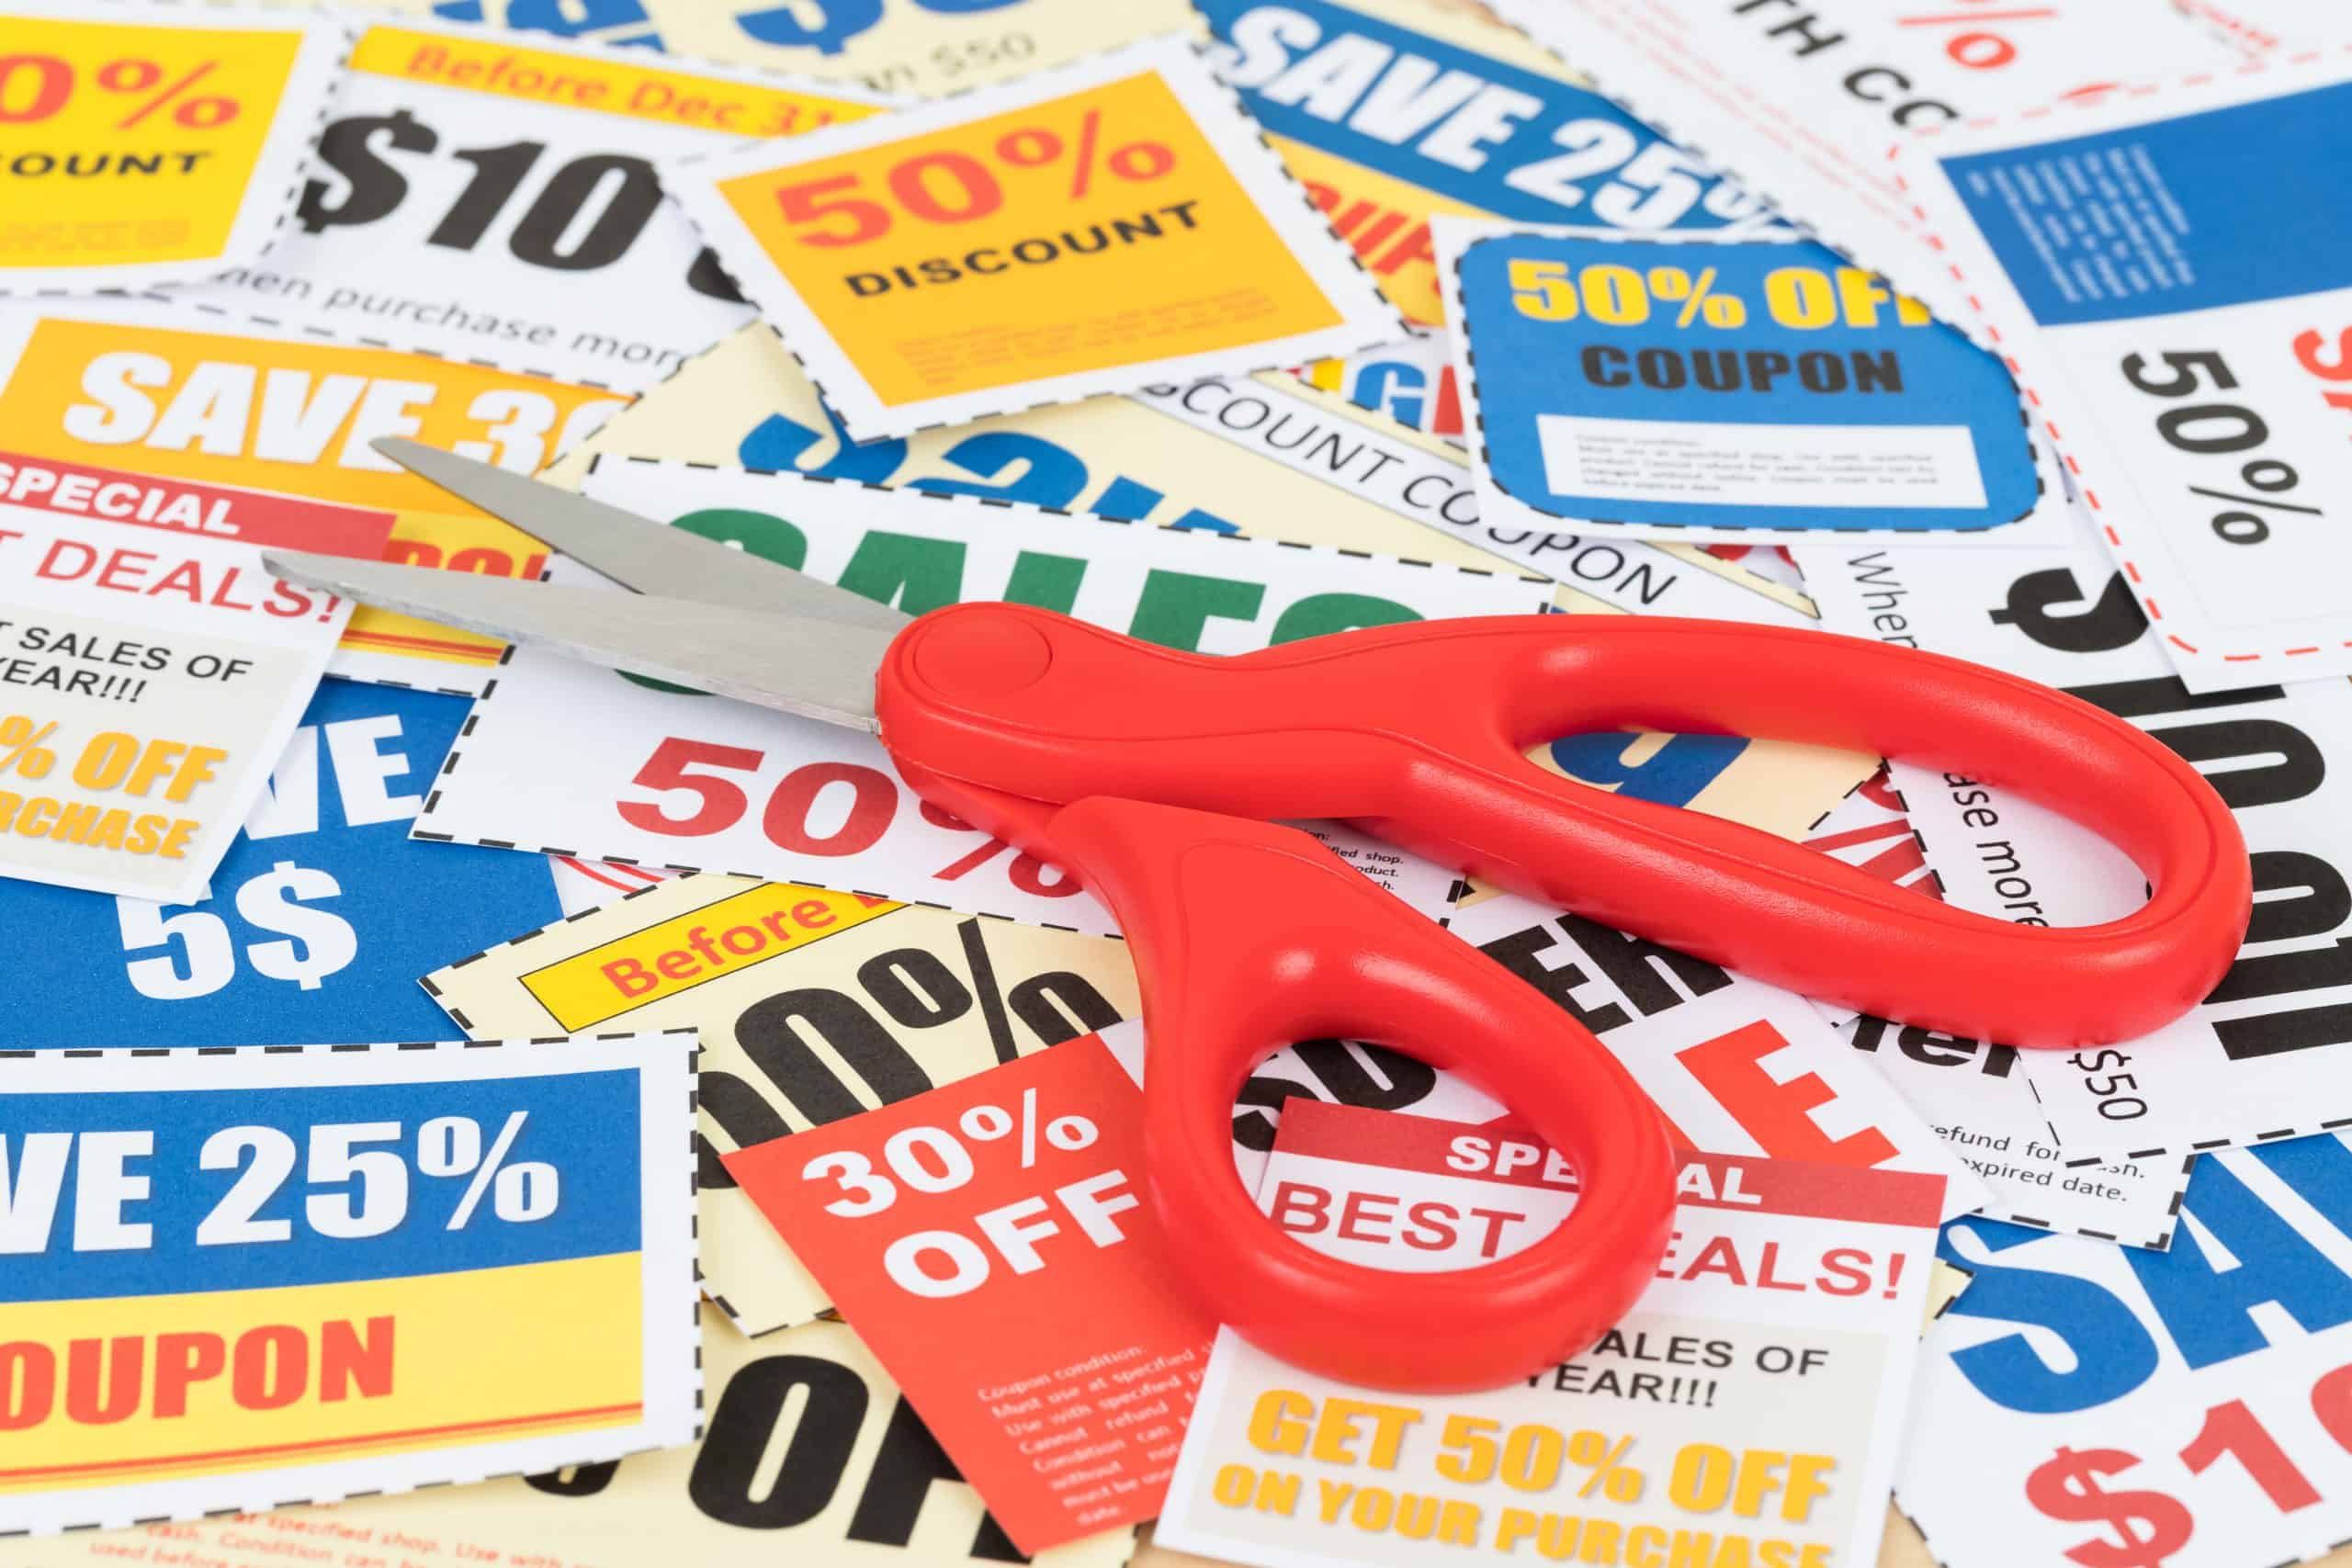 Pair of scissors with red handles on top of pile of coupons